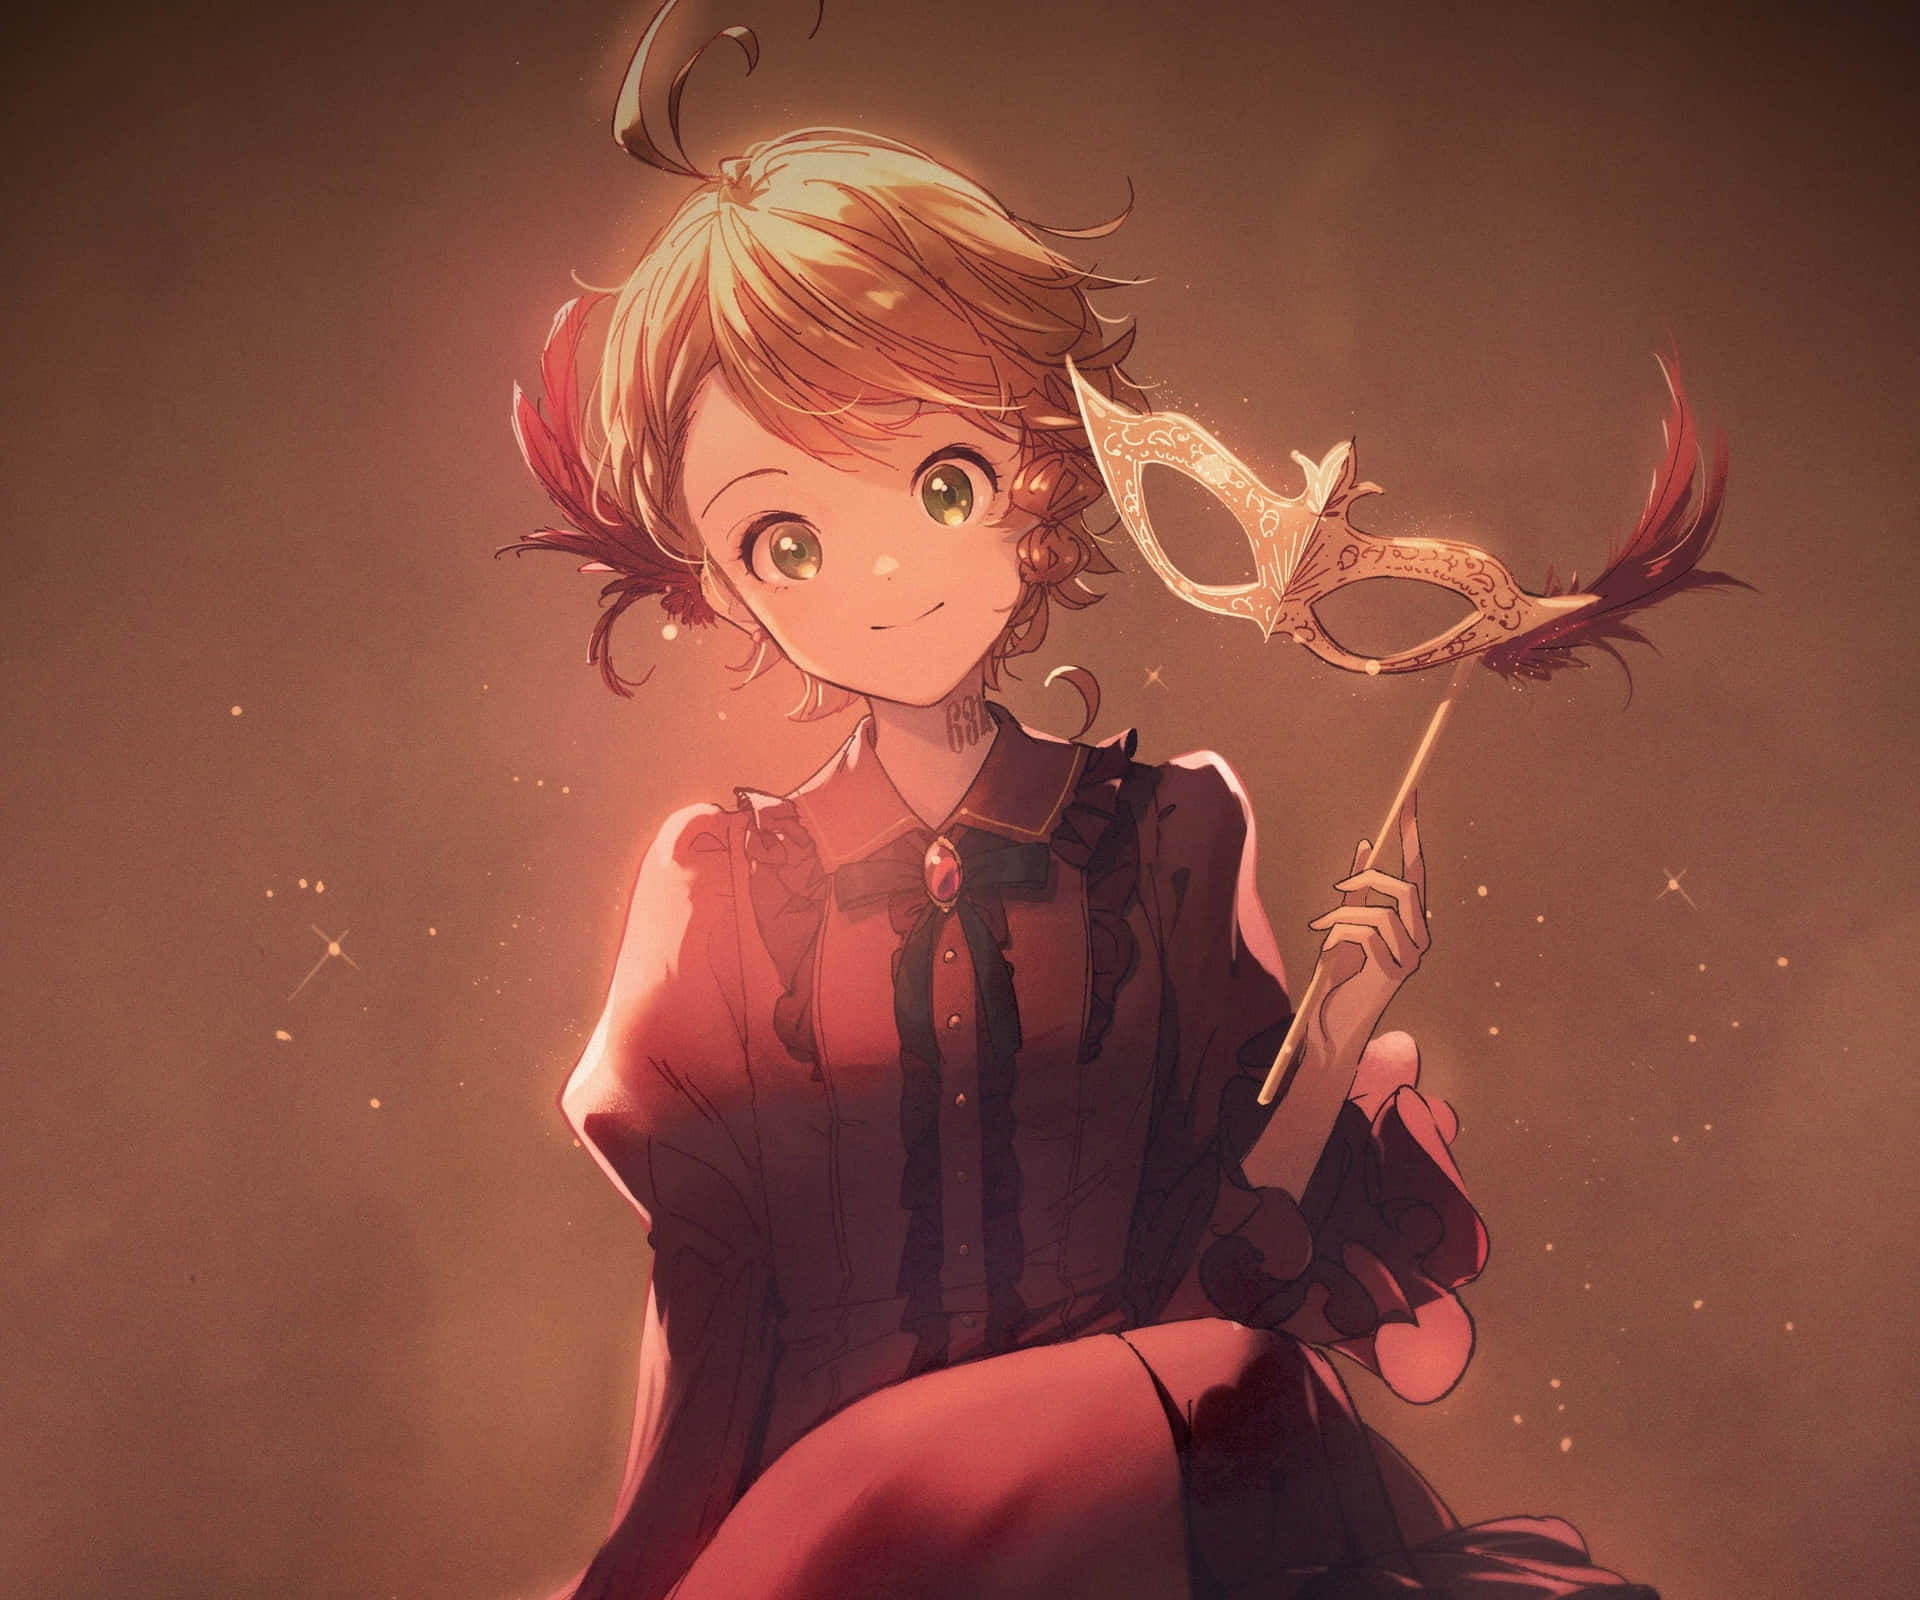 Emma, a brave girl in The Promised Neverland Wallpaper